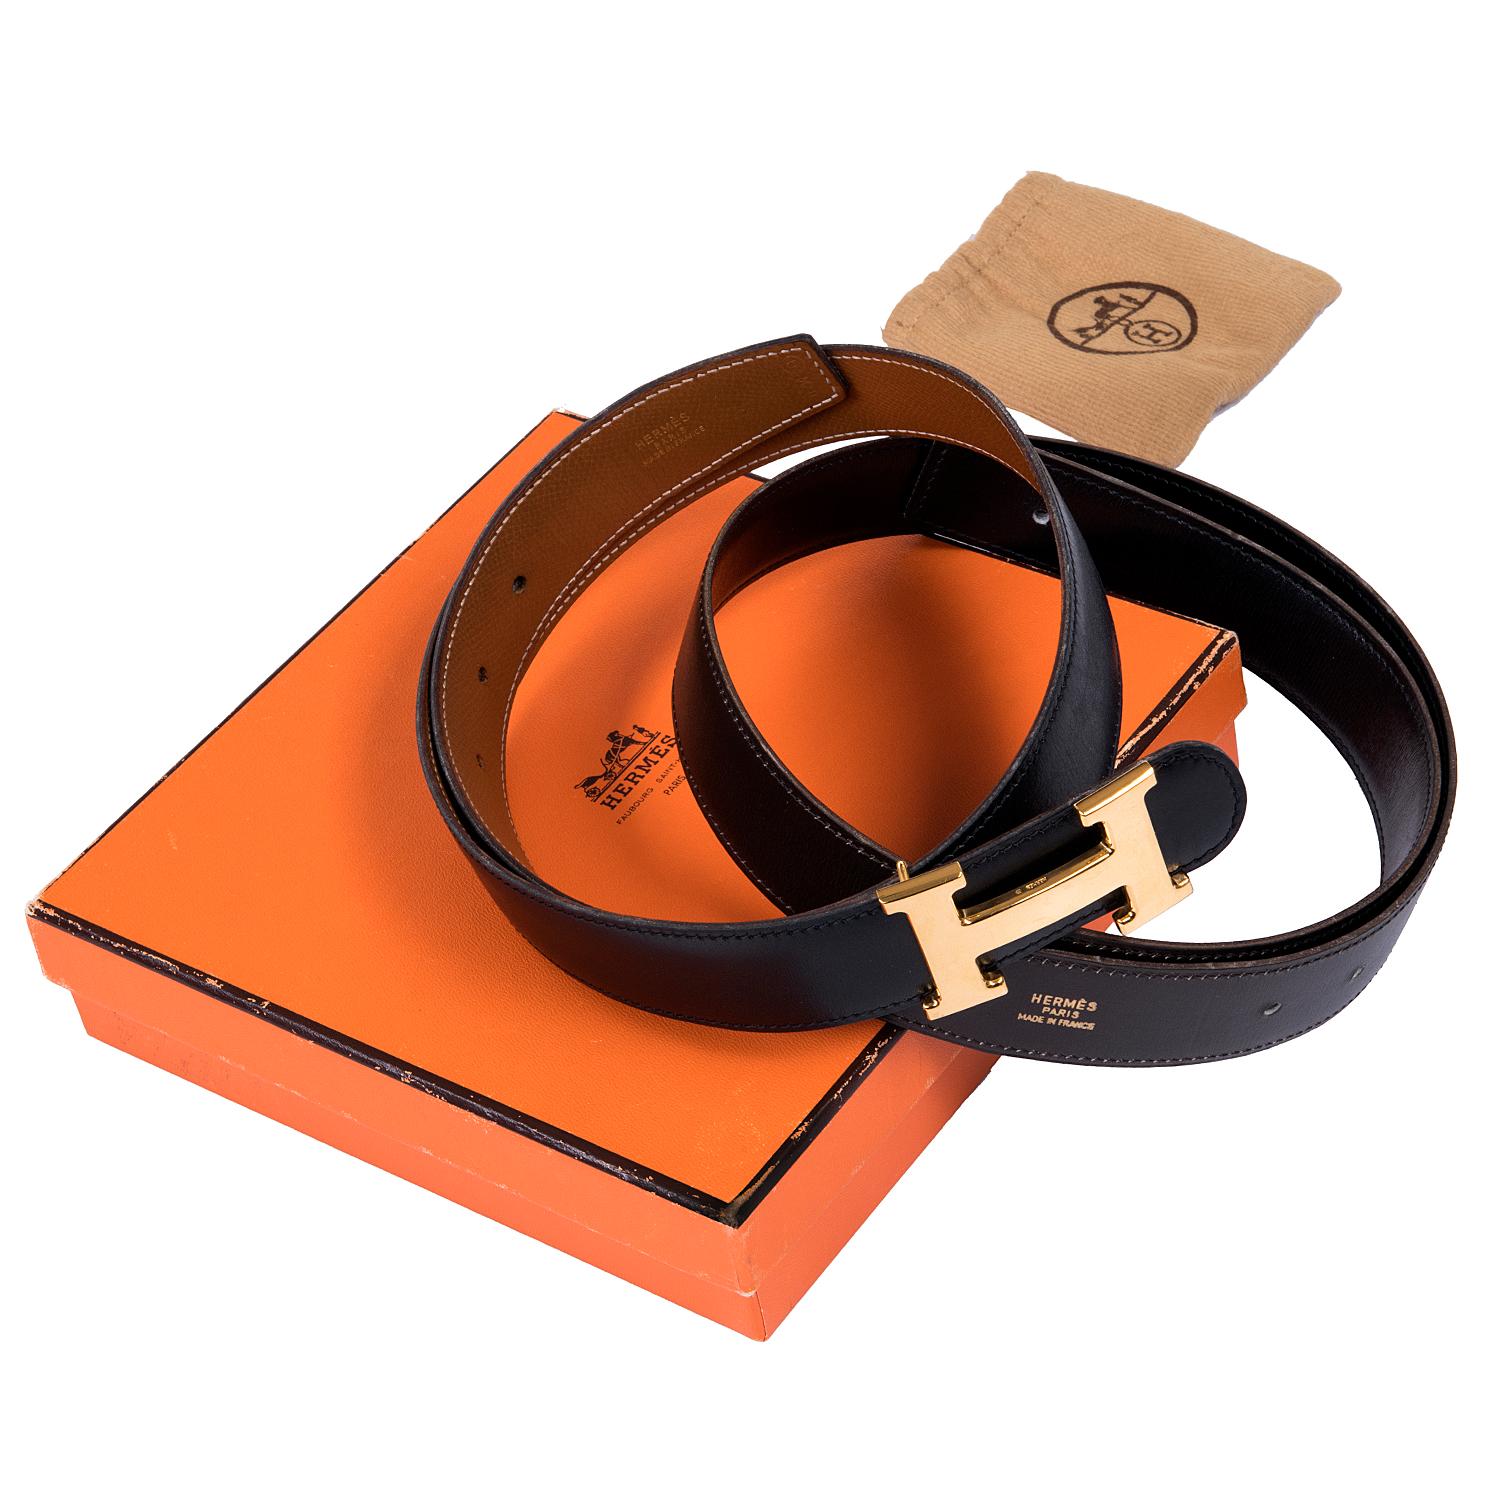 A Real Find !! Two vintage Hermes Reversible leather belts, fitted with the iconic Gold Hermes 'H' Buckle. The belts measure 70cm (28in.) and are interchangeable with the 'H' buckle. The belts come with their original Hermes box and Buckle storage